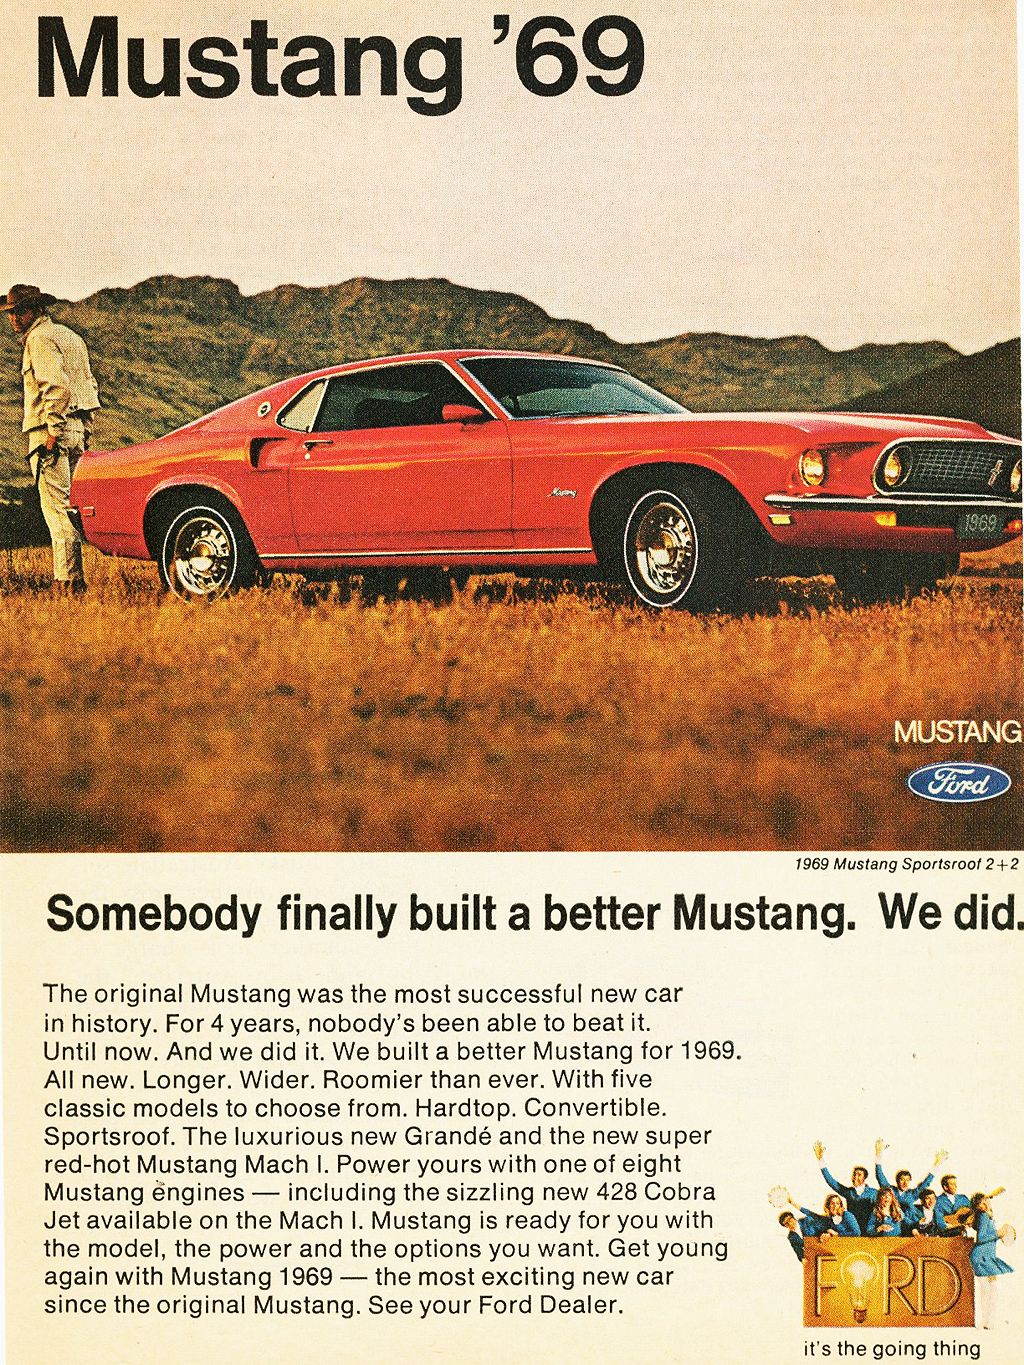 1969 Ford Mustang ad | CLASSIC CARS TODAY ONLINE